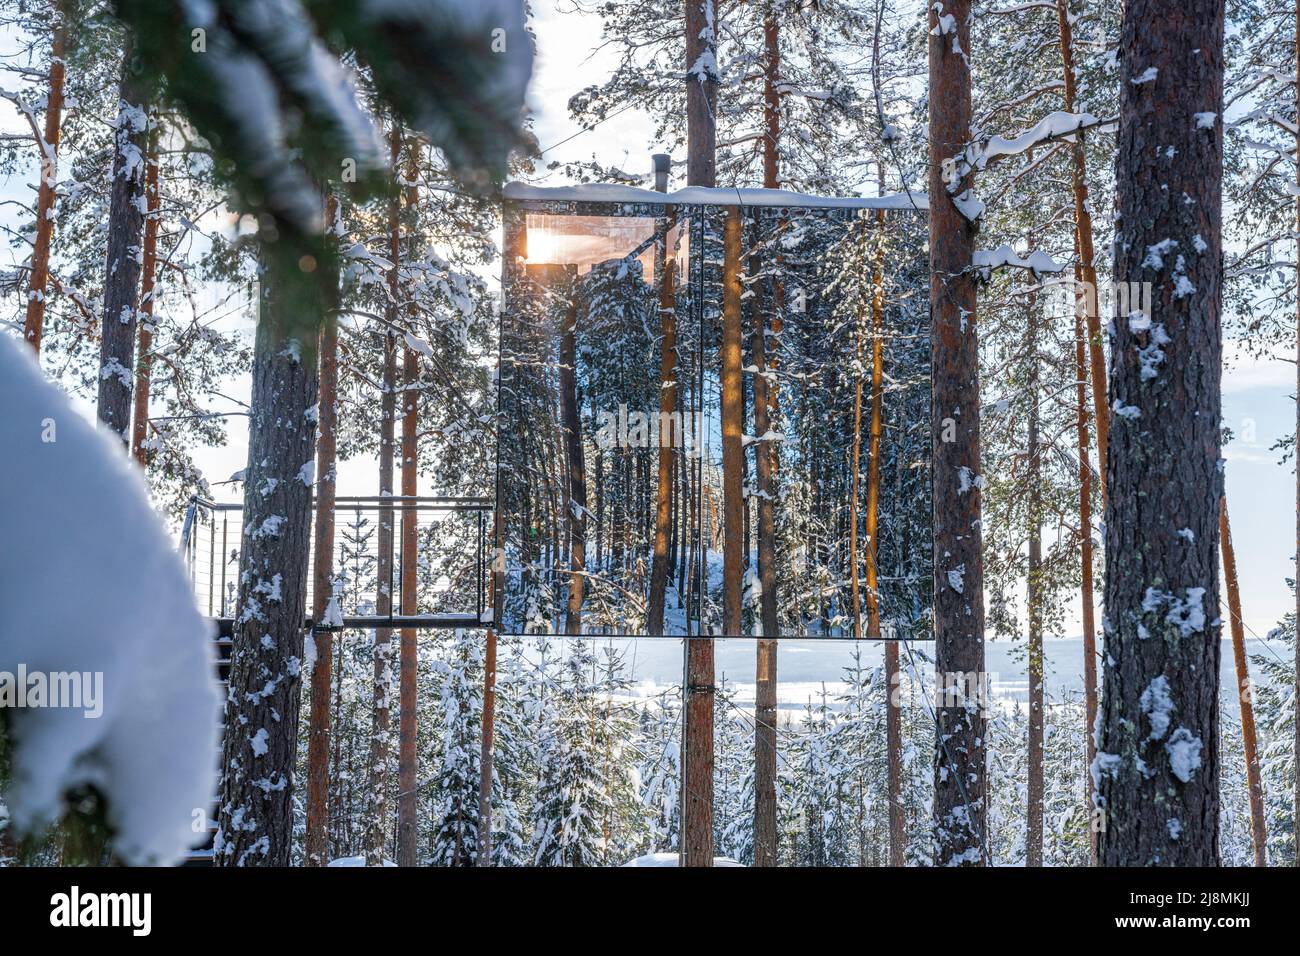 Cube shaped room on snowy trees with mirror walls reflecting the beauty surrounding forest, Tree hotel, Harads, Lapland, Sweden Stock Photo